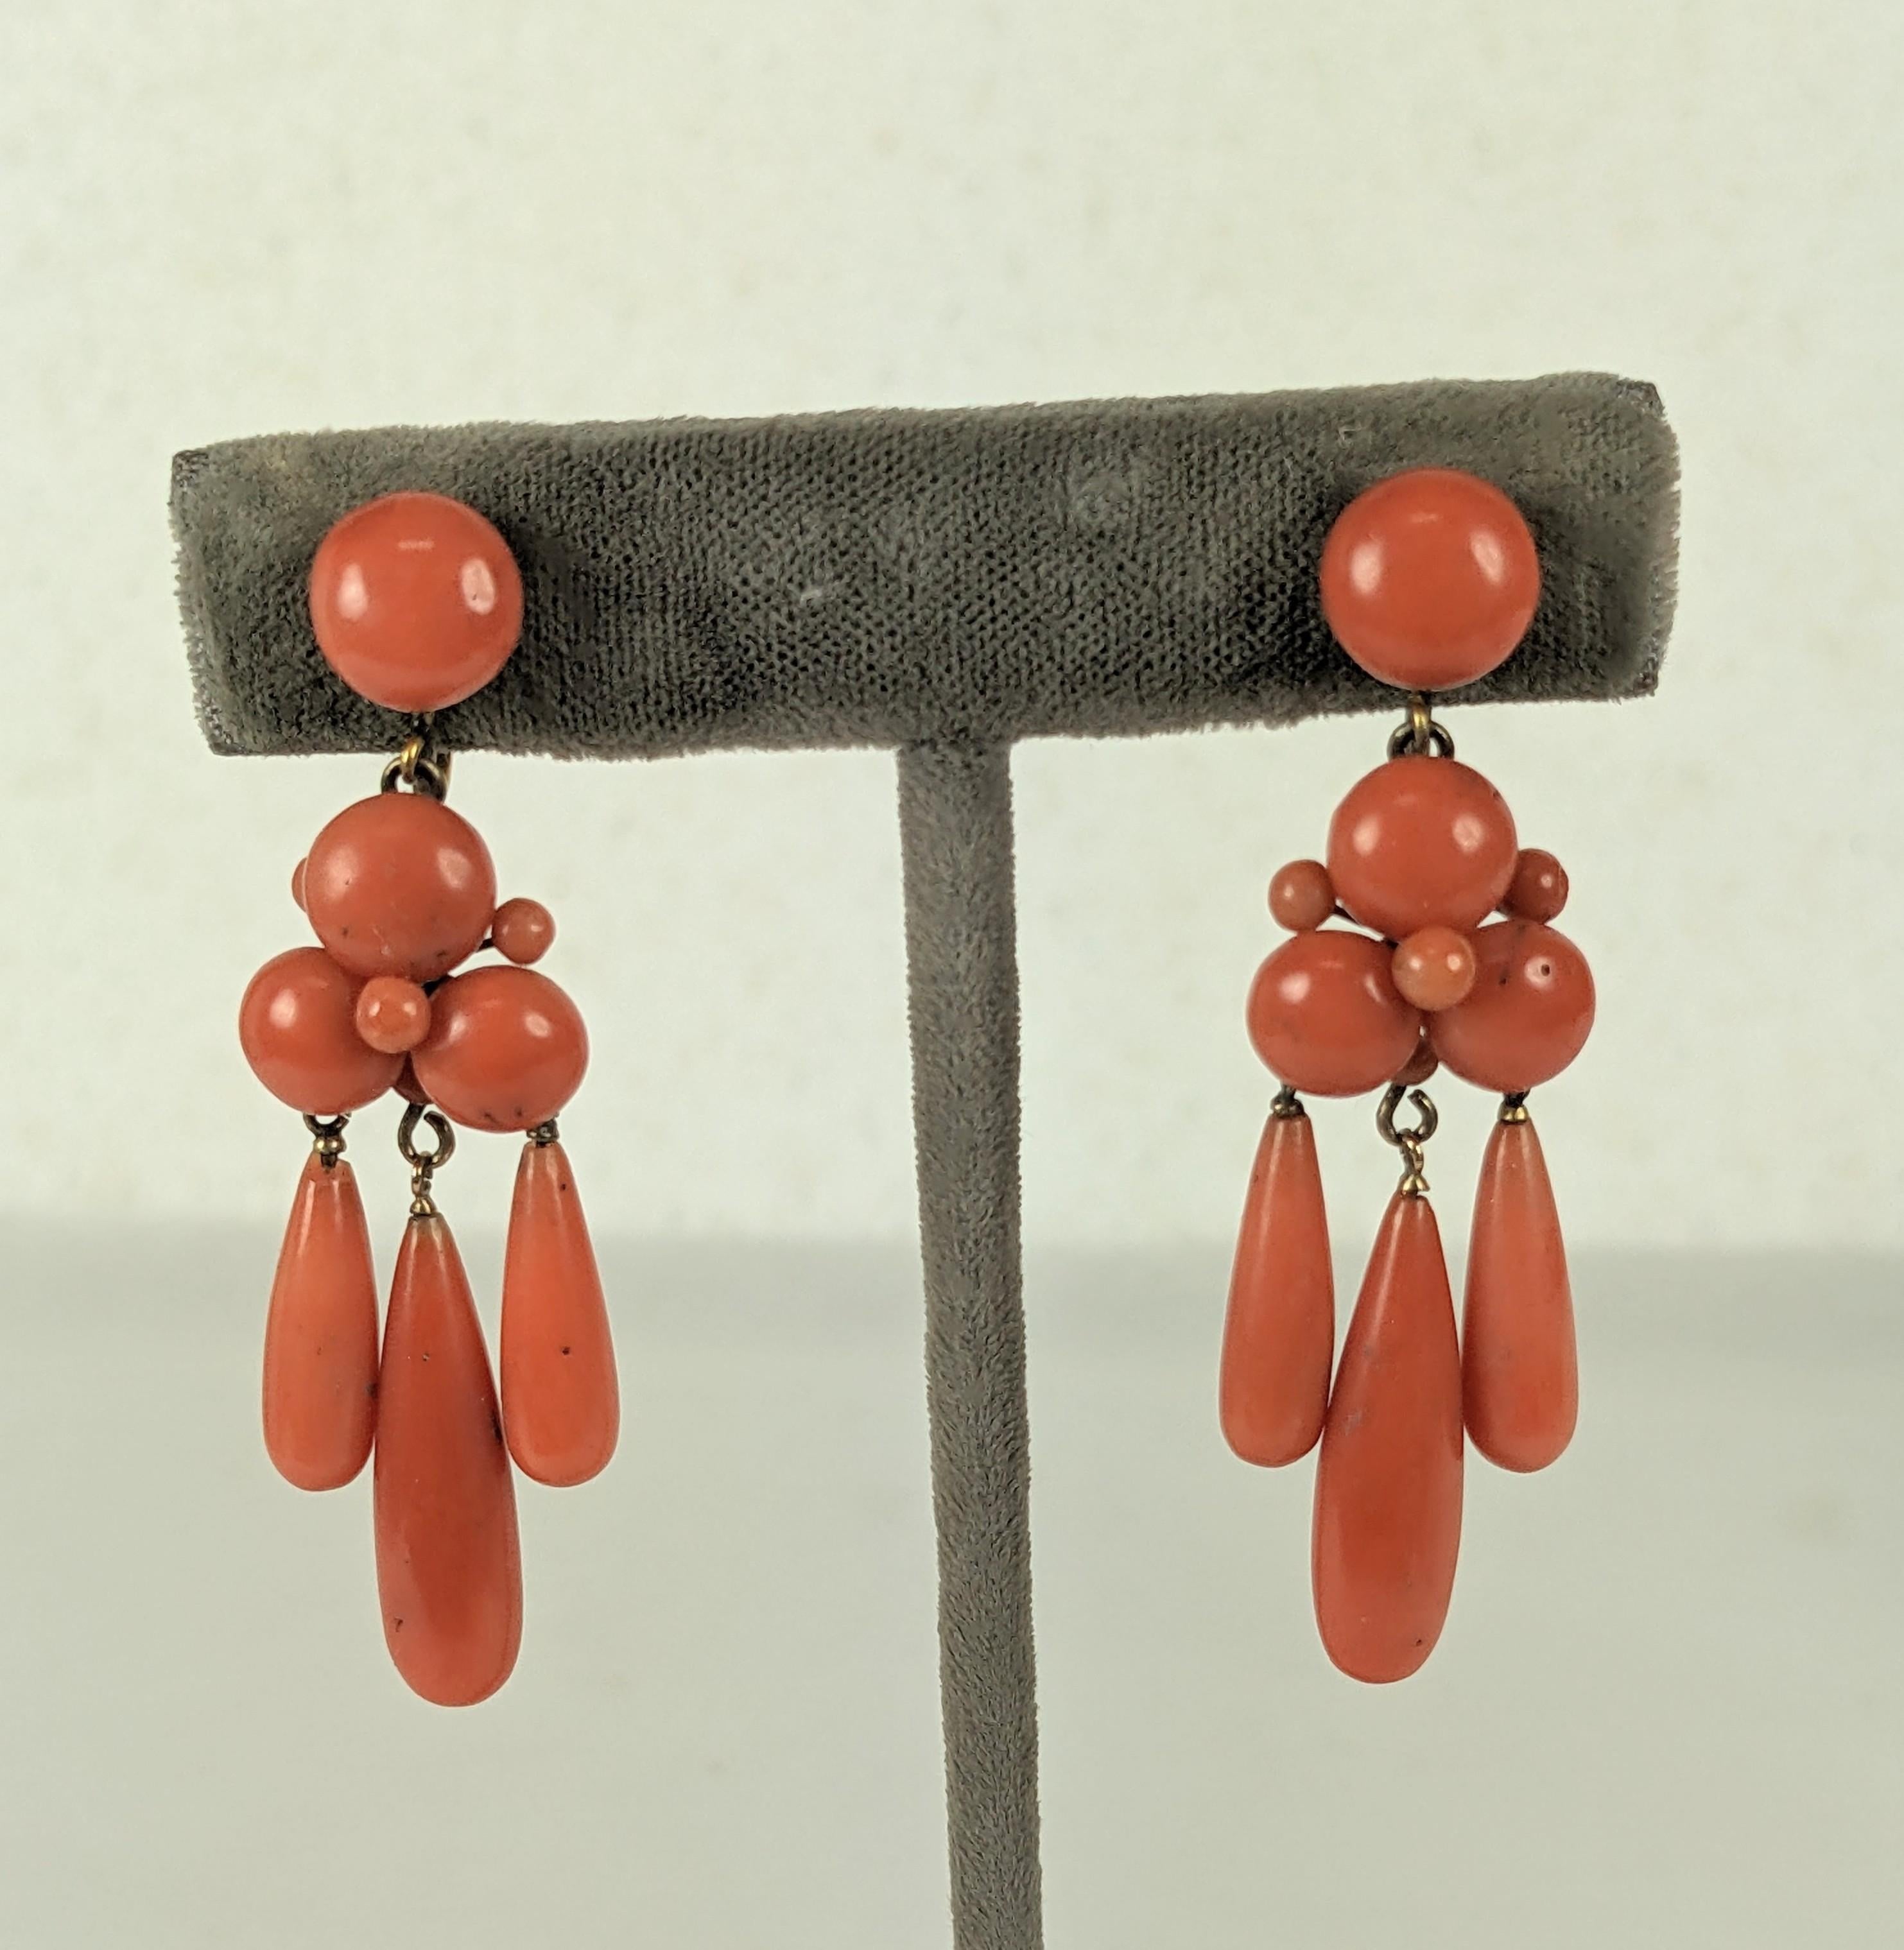 Lovely Victorian Coral Pendant Drop Earrings from the 19th Century with screw back fittings. Italian coral beads with original gold filled settings and 3 graduated coral pendant drops. Italy. 1880's. 2.25